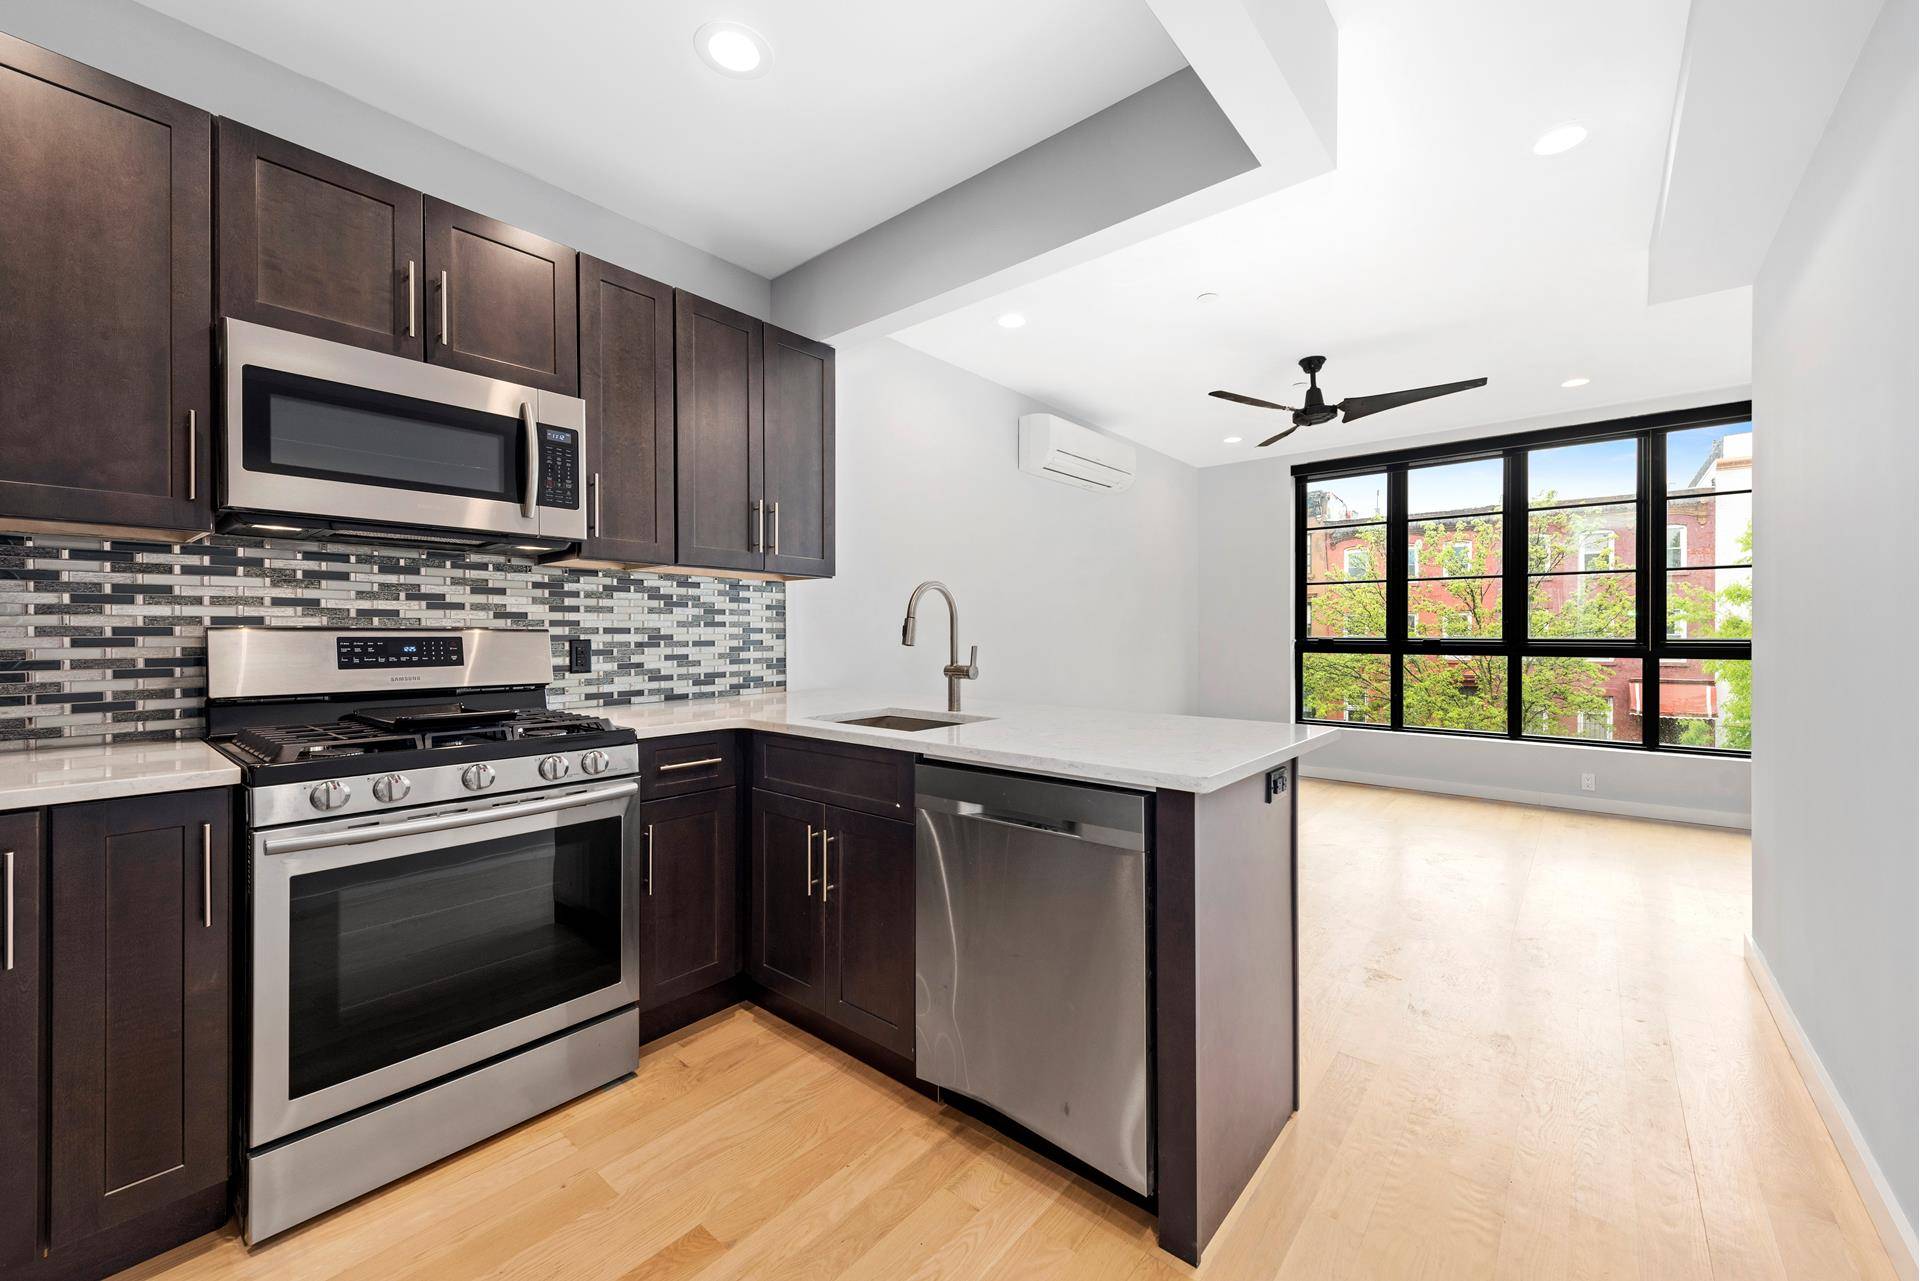 Located on a picturesque tree lined block steps away from Herbert Von King Park, this spacious unit is filled with natural light and luxury appliances.